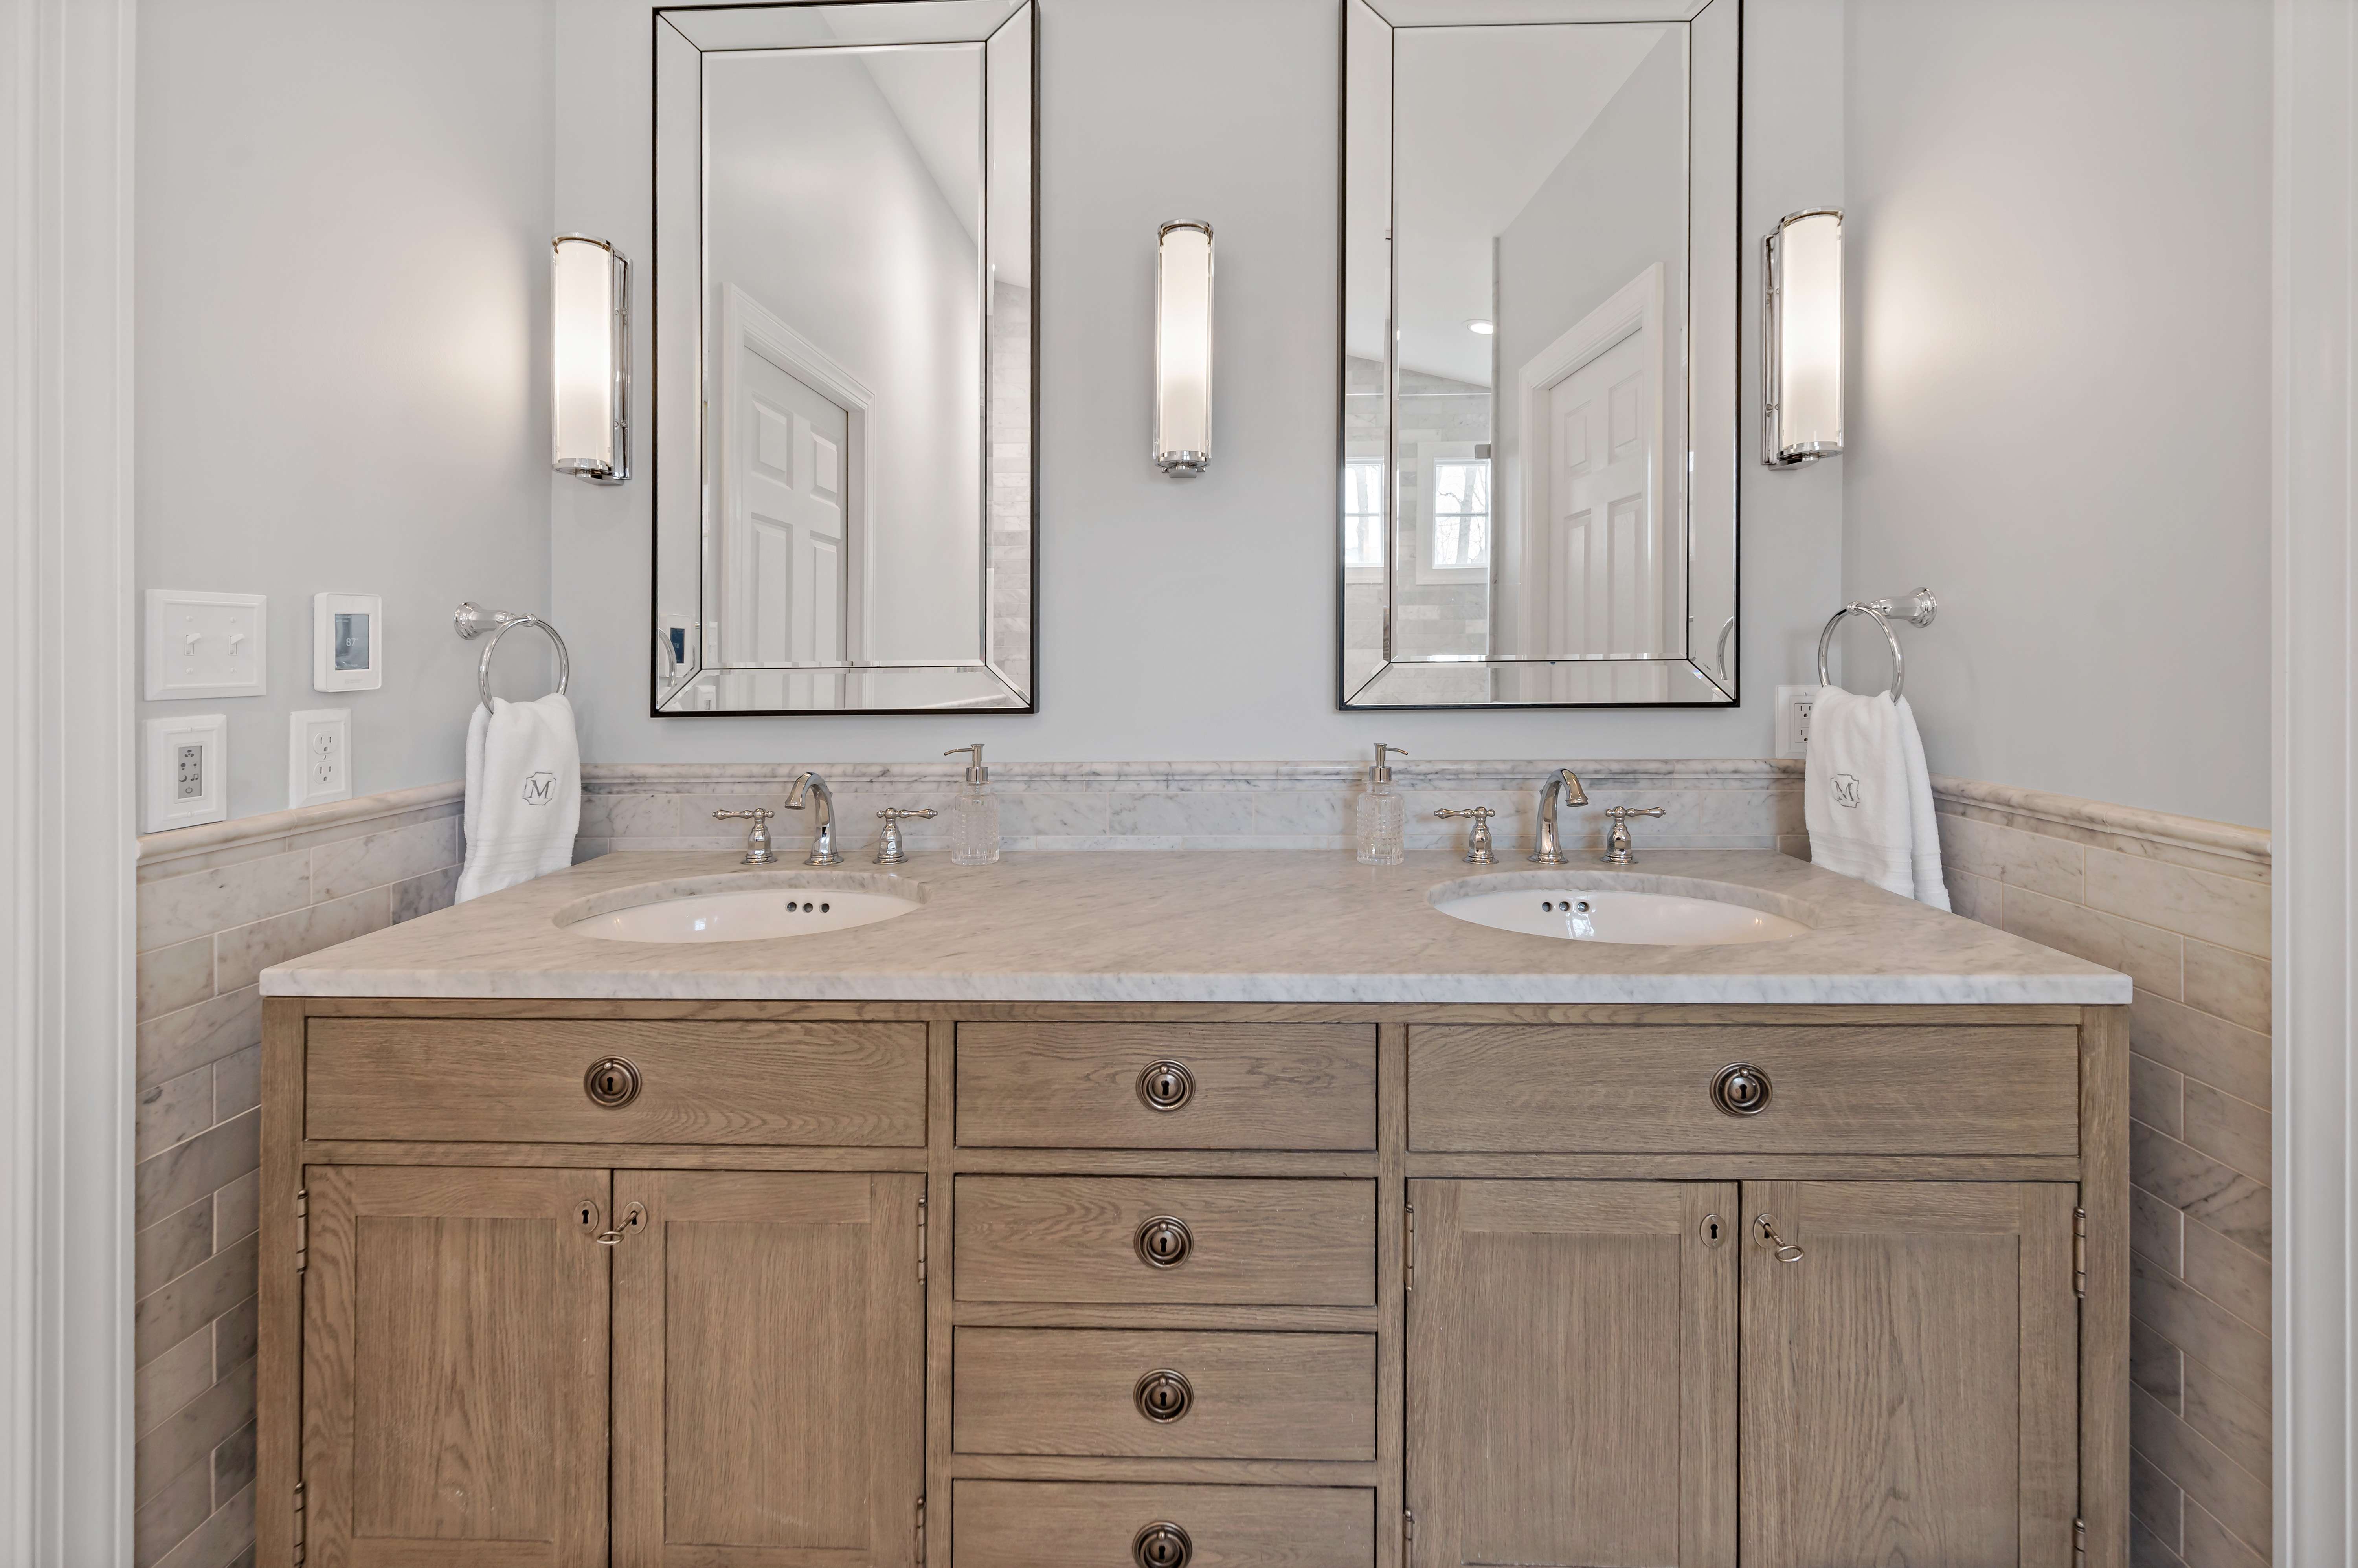 Double vanity and sink with beige cabinets in bathroom